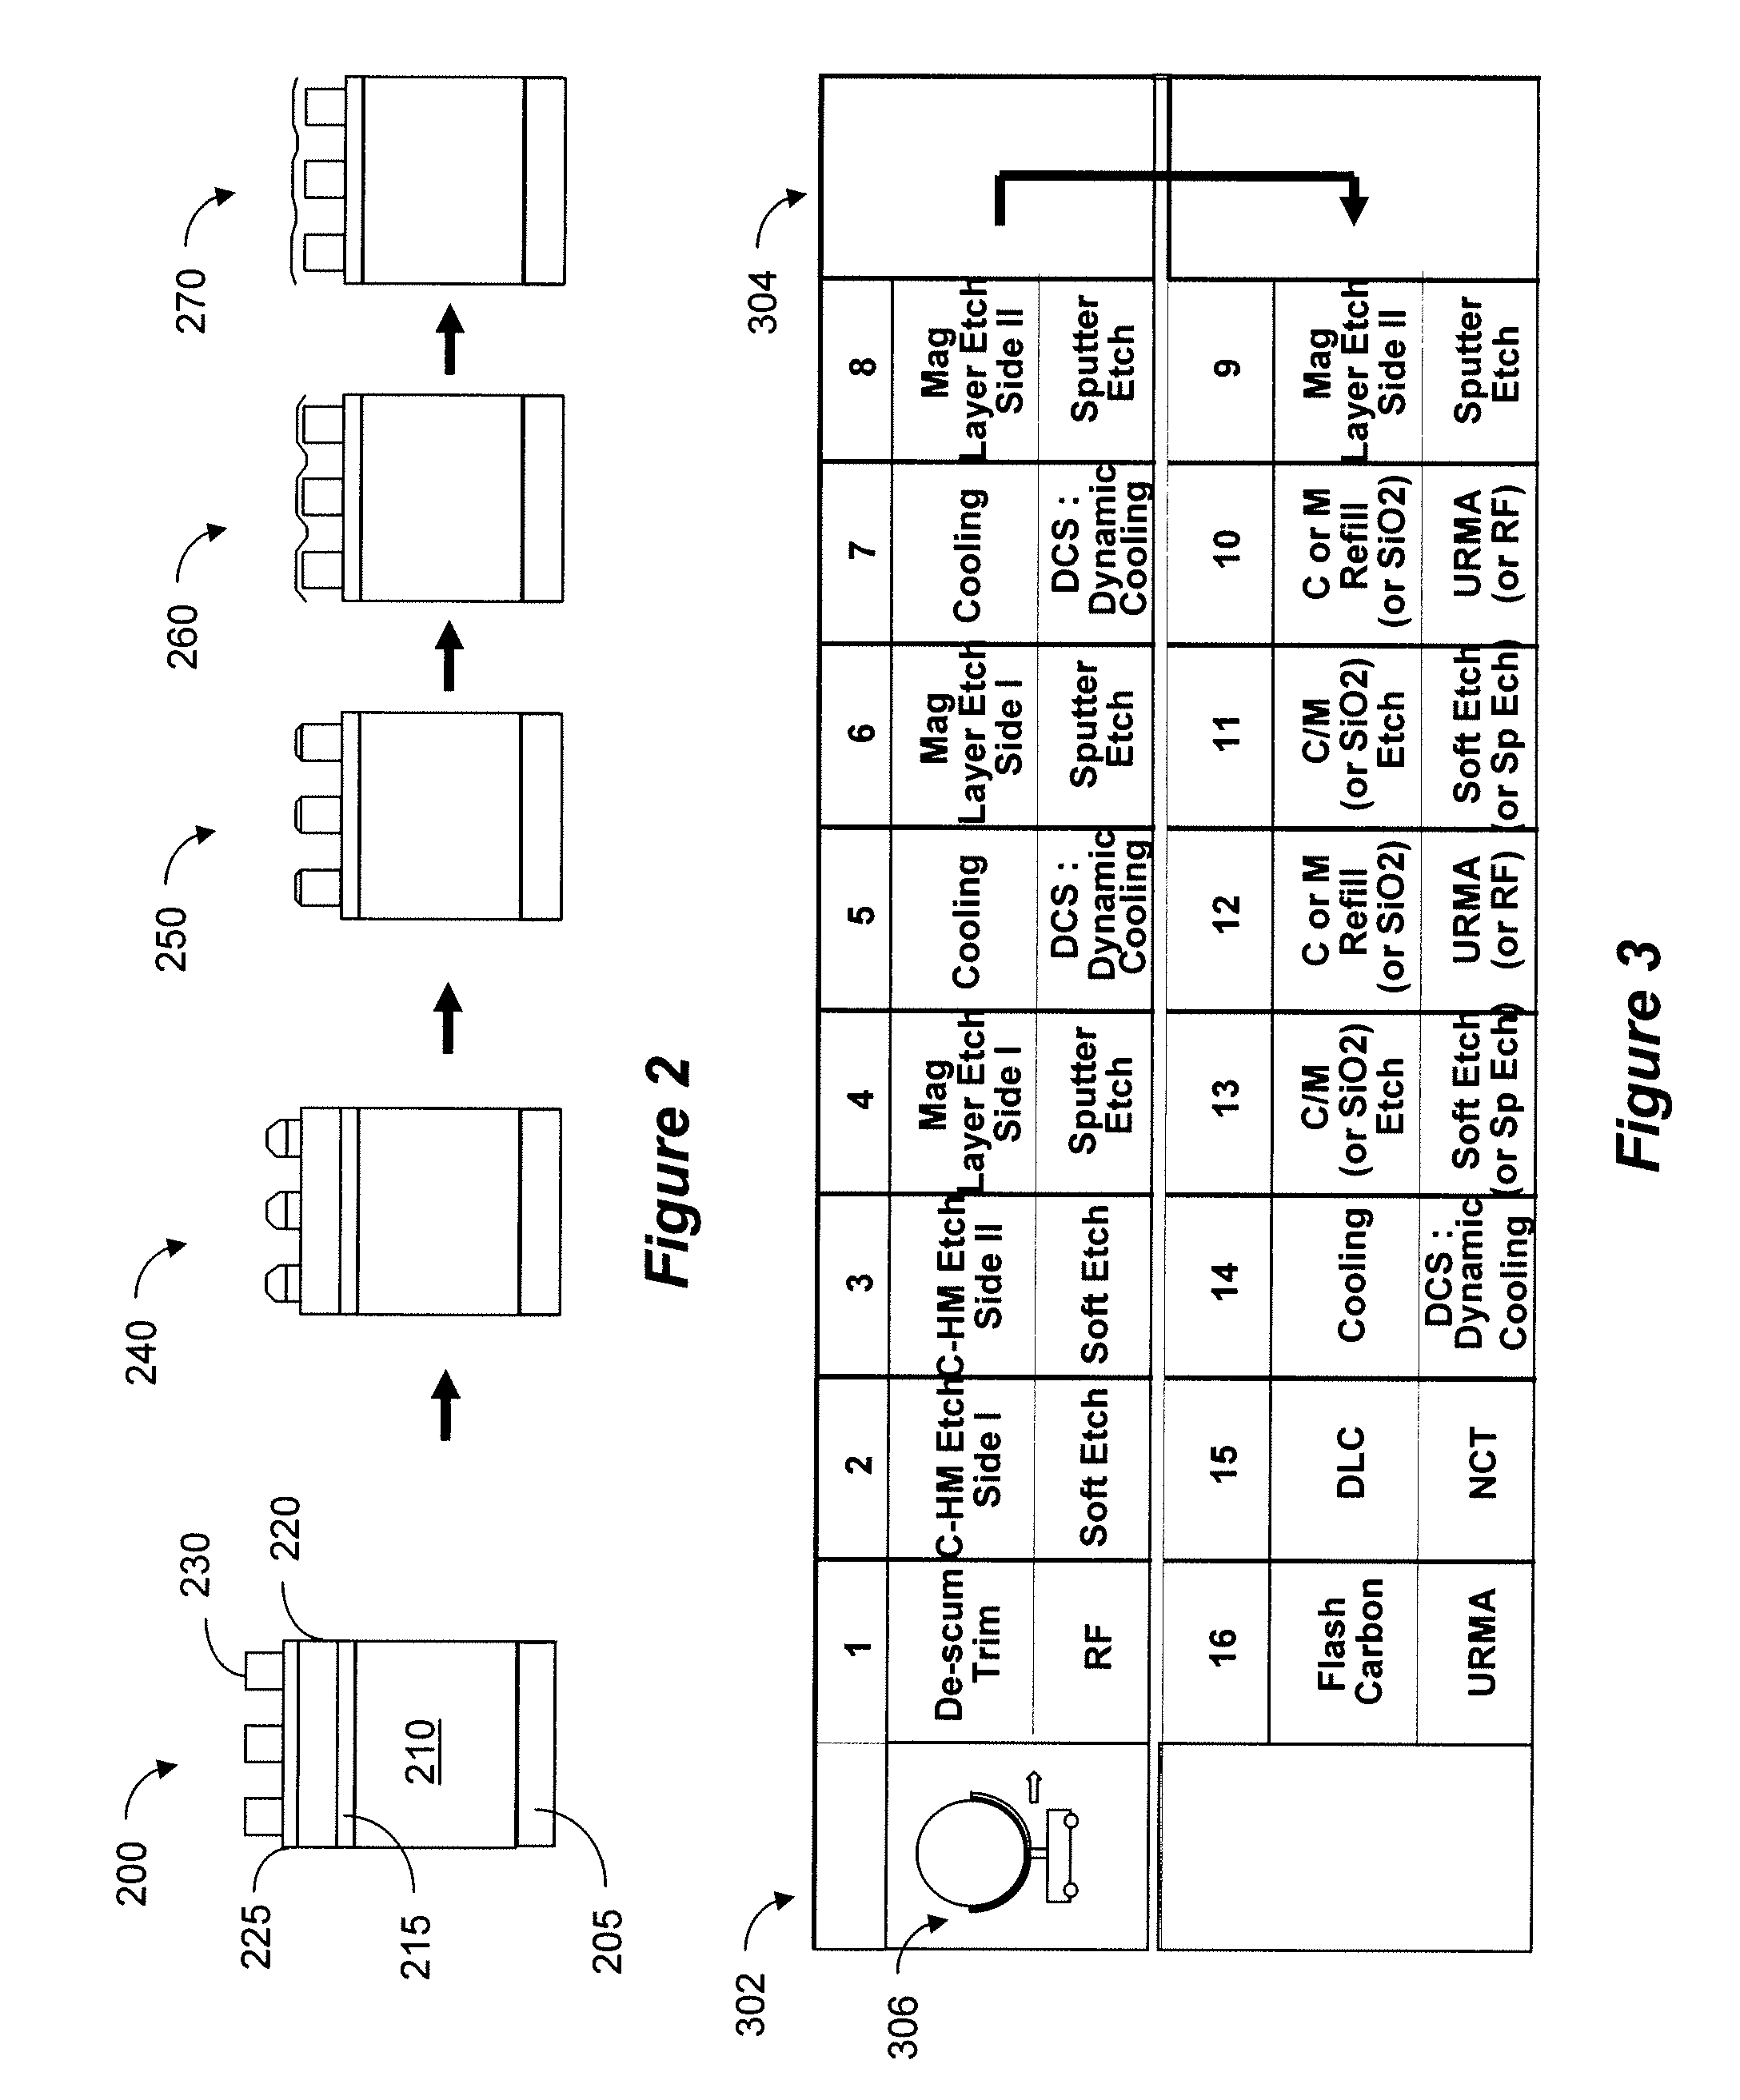 System and method for commercial fabrication of patterned media